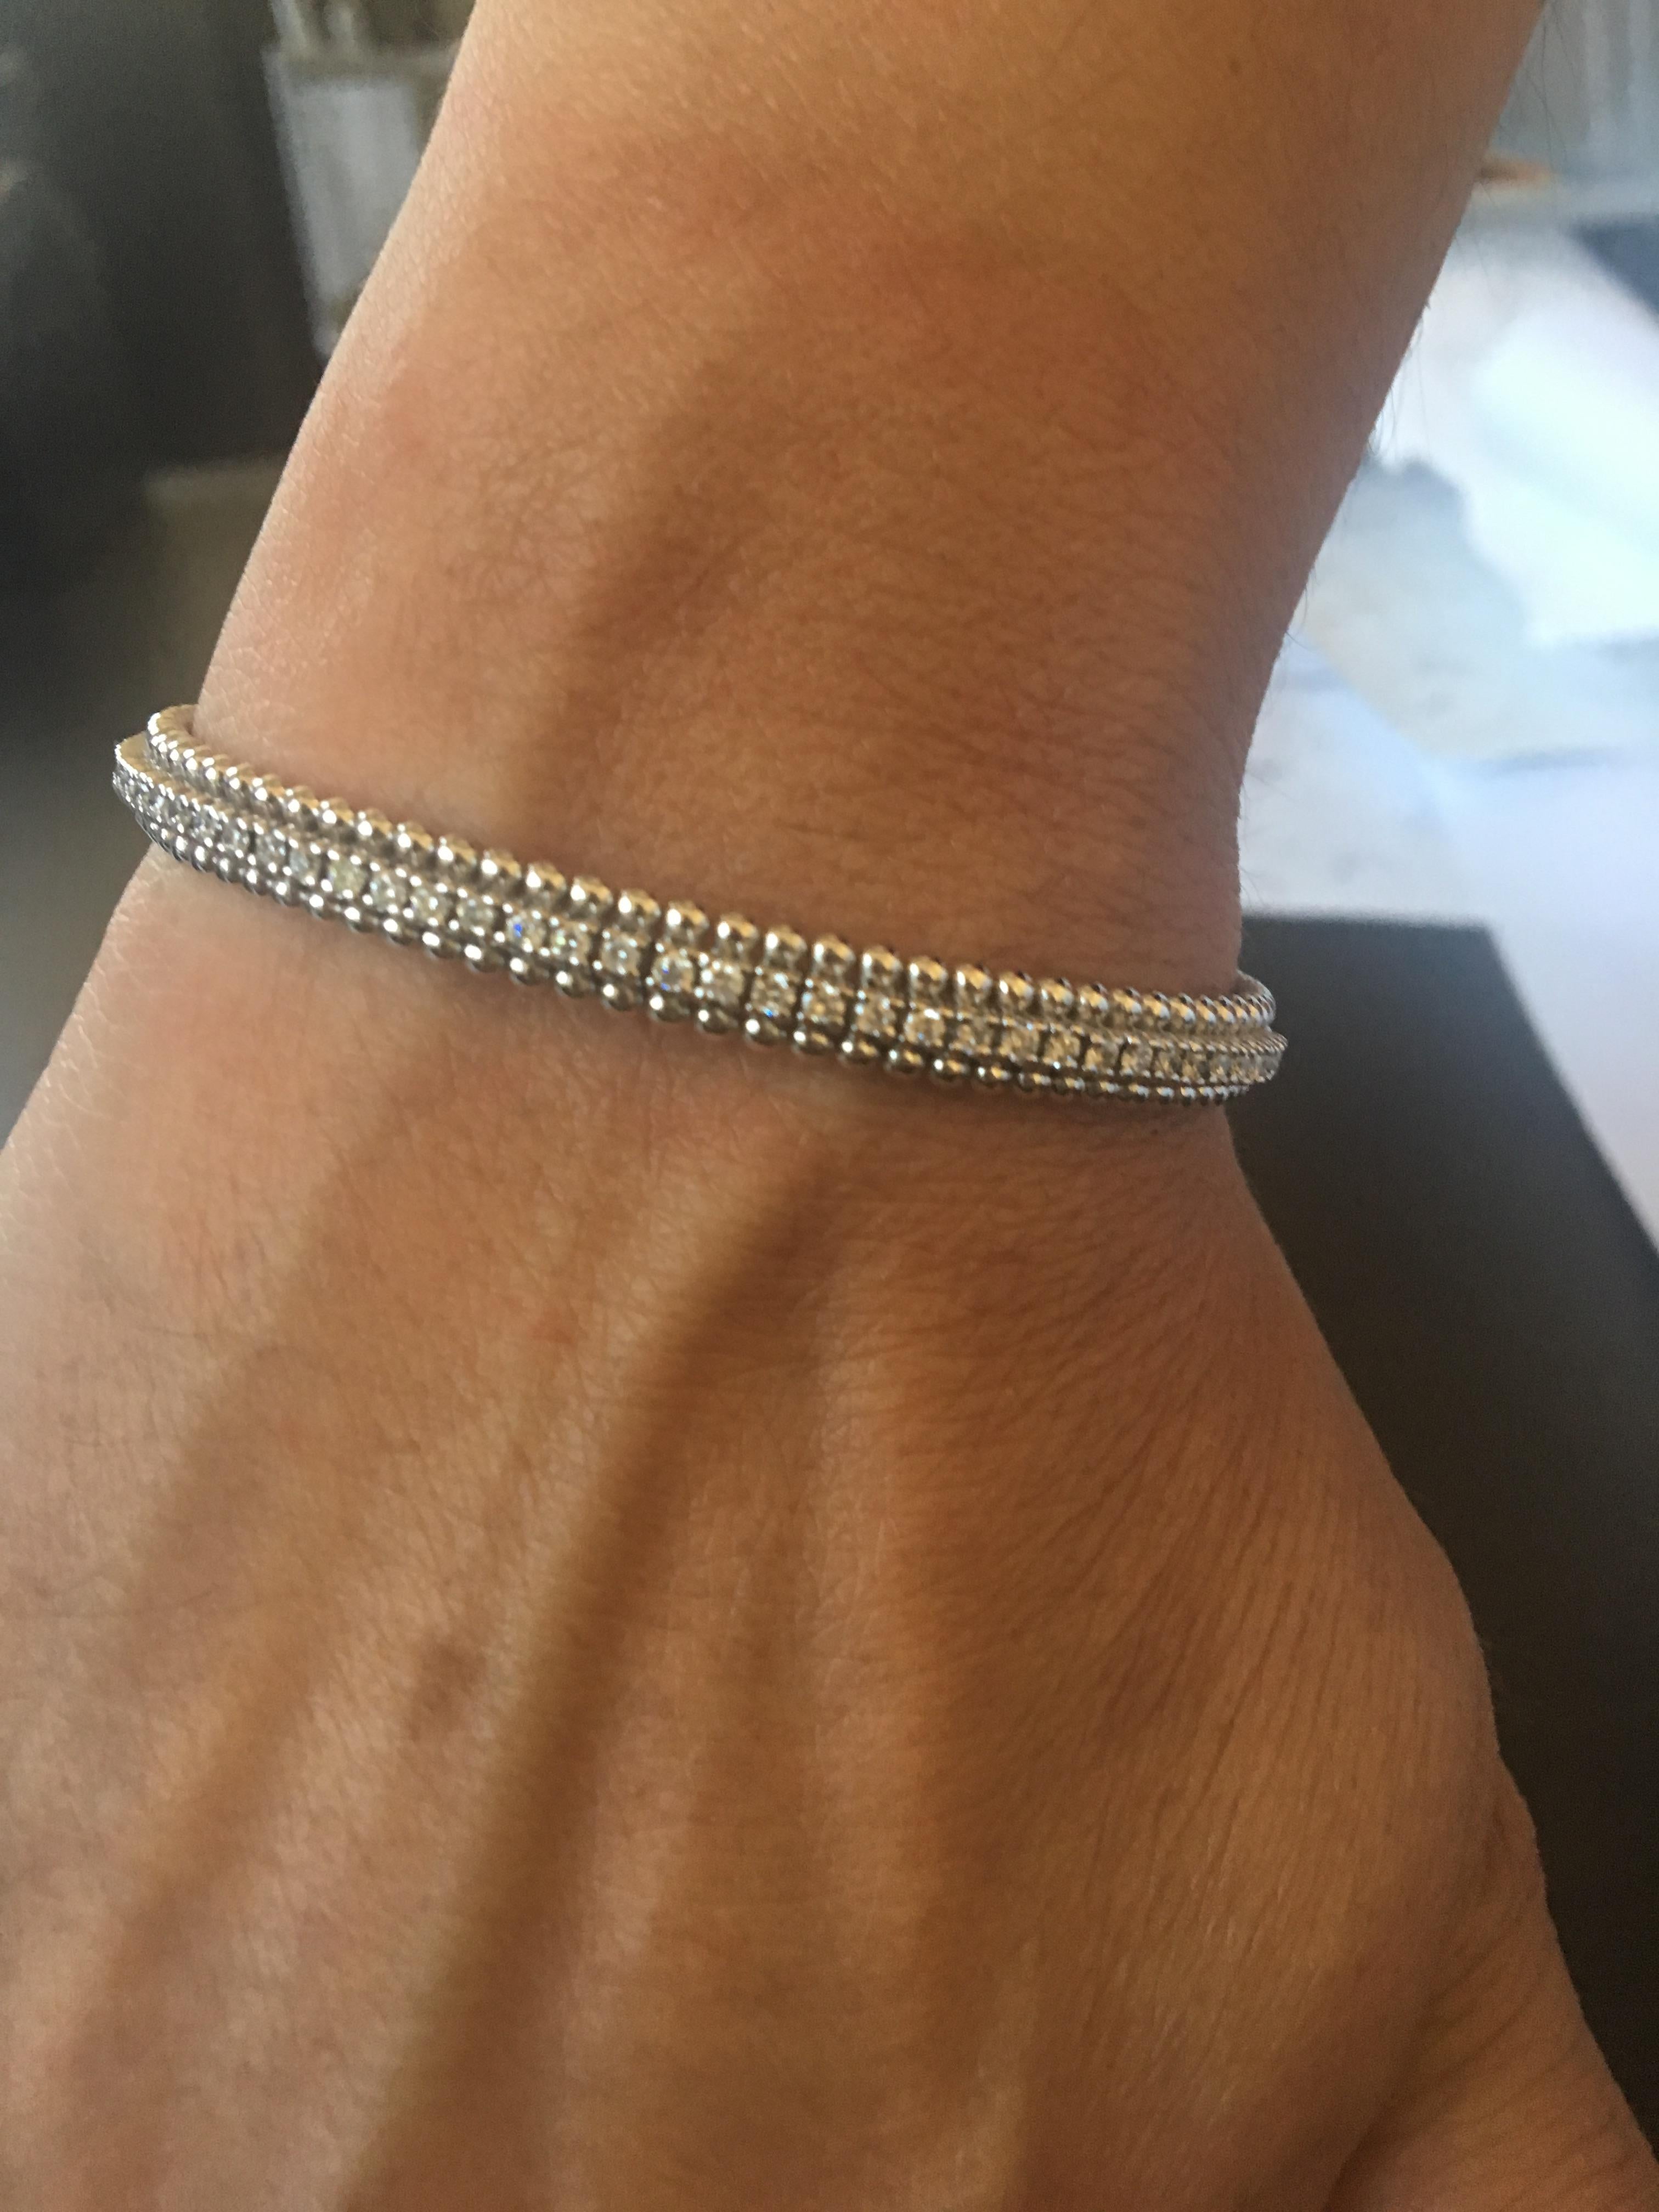 These Diamond Bangles are sold individually or as a set. They are a classic but fashion-forward piece. Made in Italy 18 Karat White Gold, 0.82 Carat wt each,  Color G, Clarity SI. Each bangle is made like a flexible cuff and is $2500 each. 